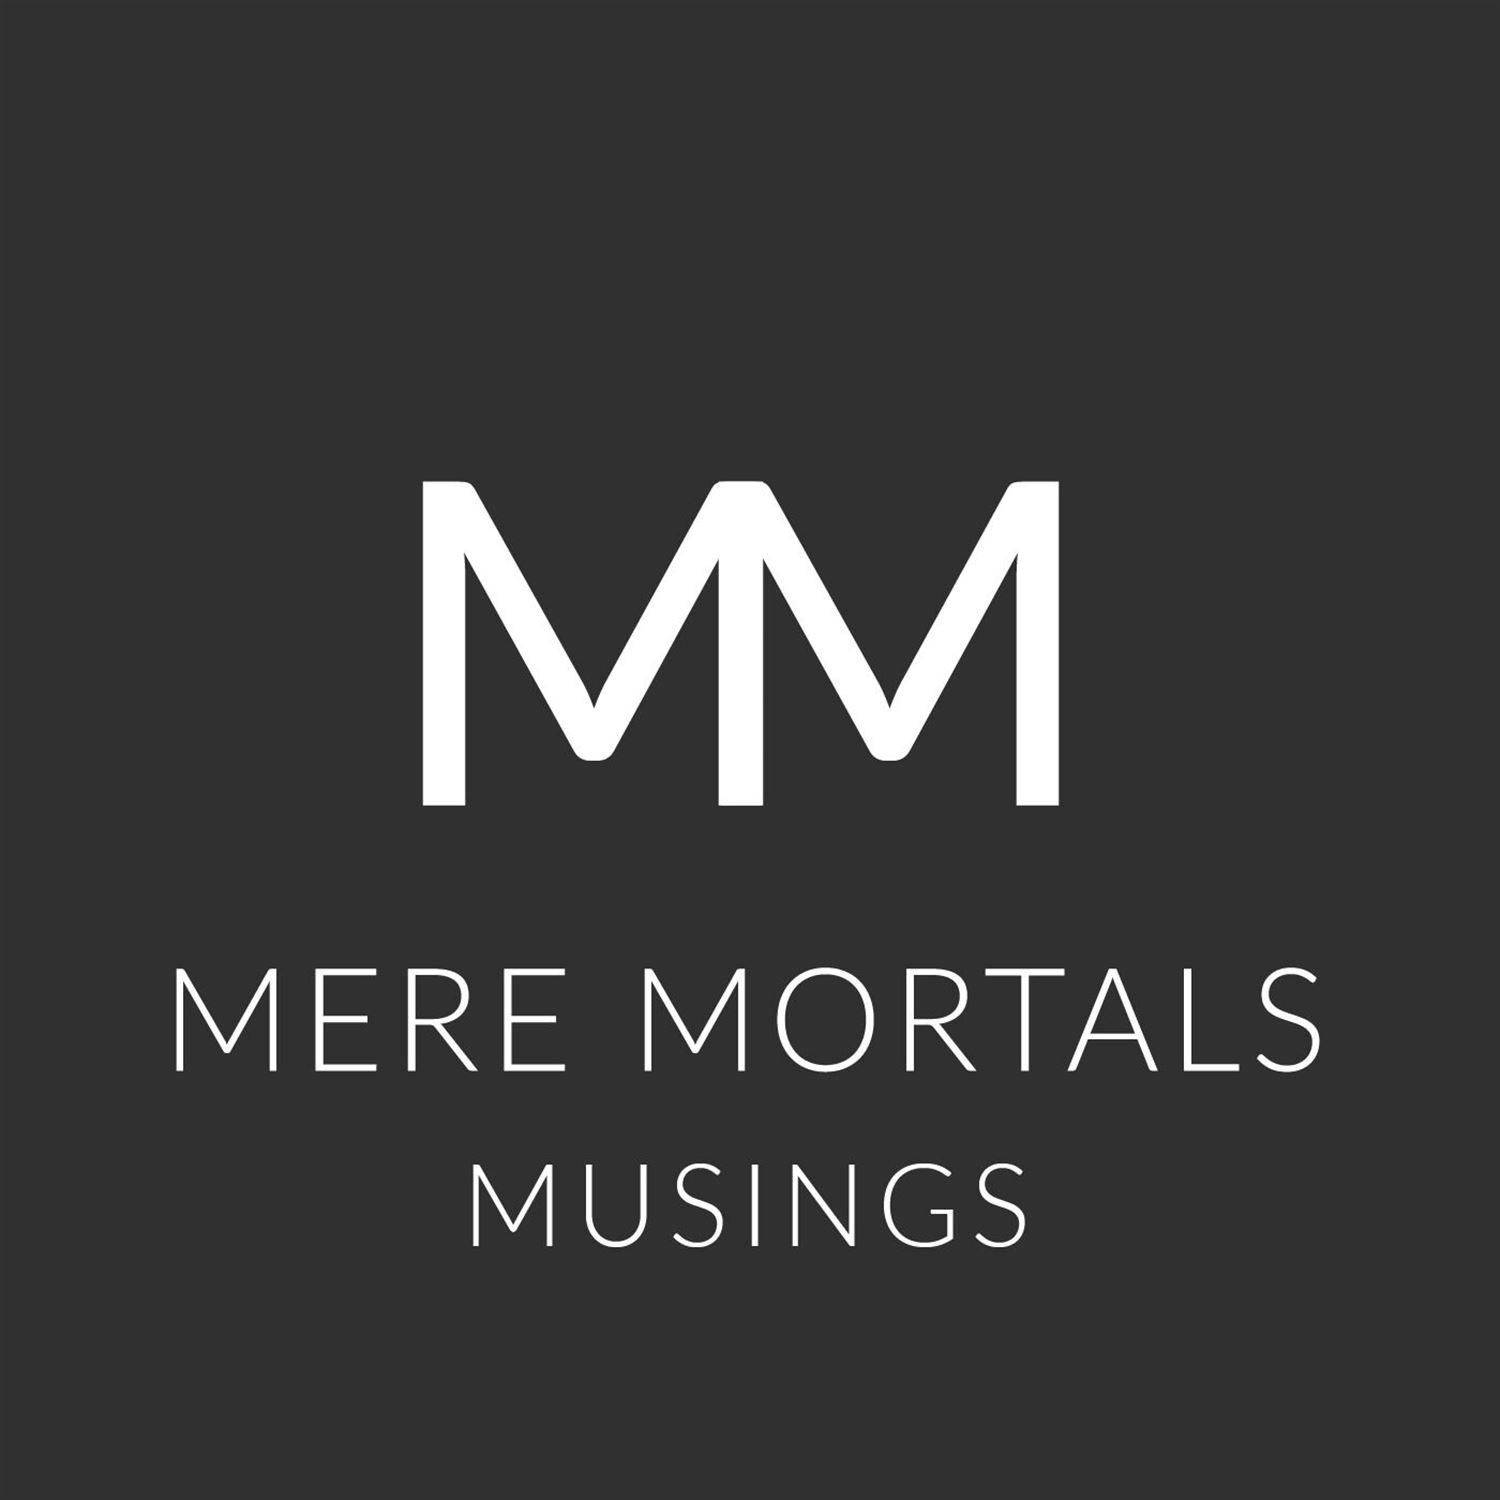 Working Extra Hours & Anti-Quotes (Mere Mortals Episode #50 - Musings)